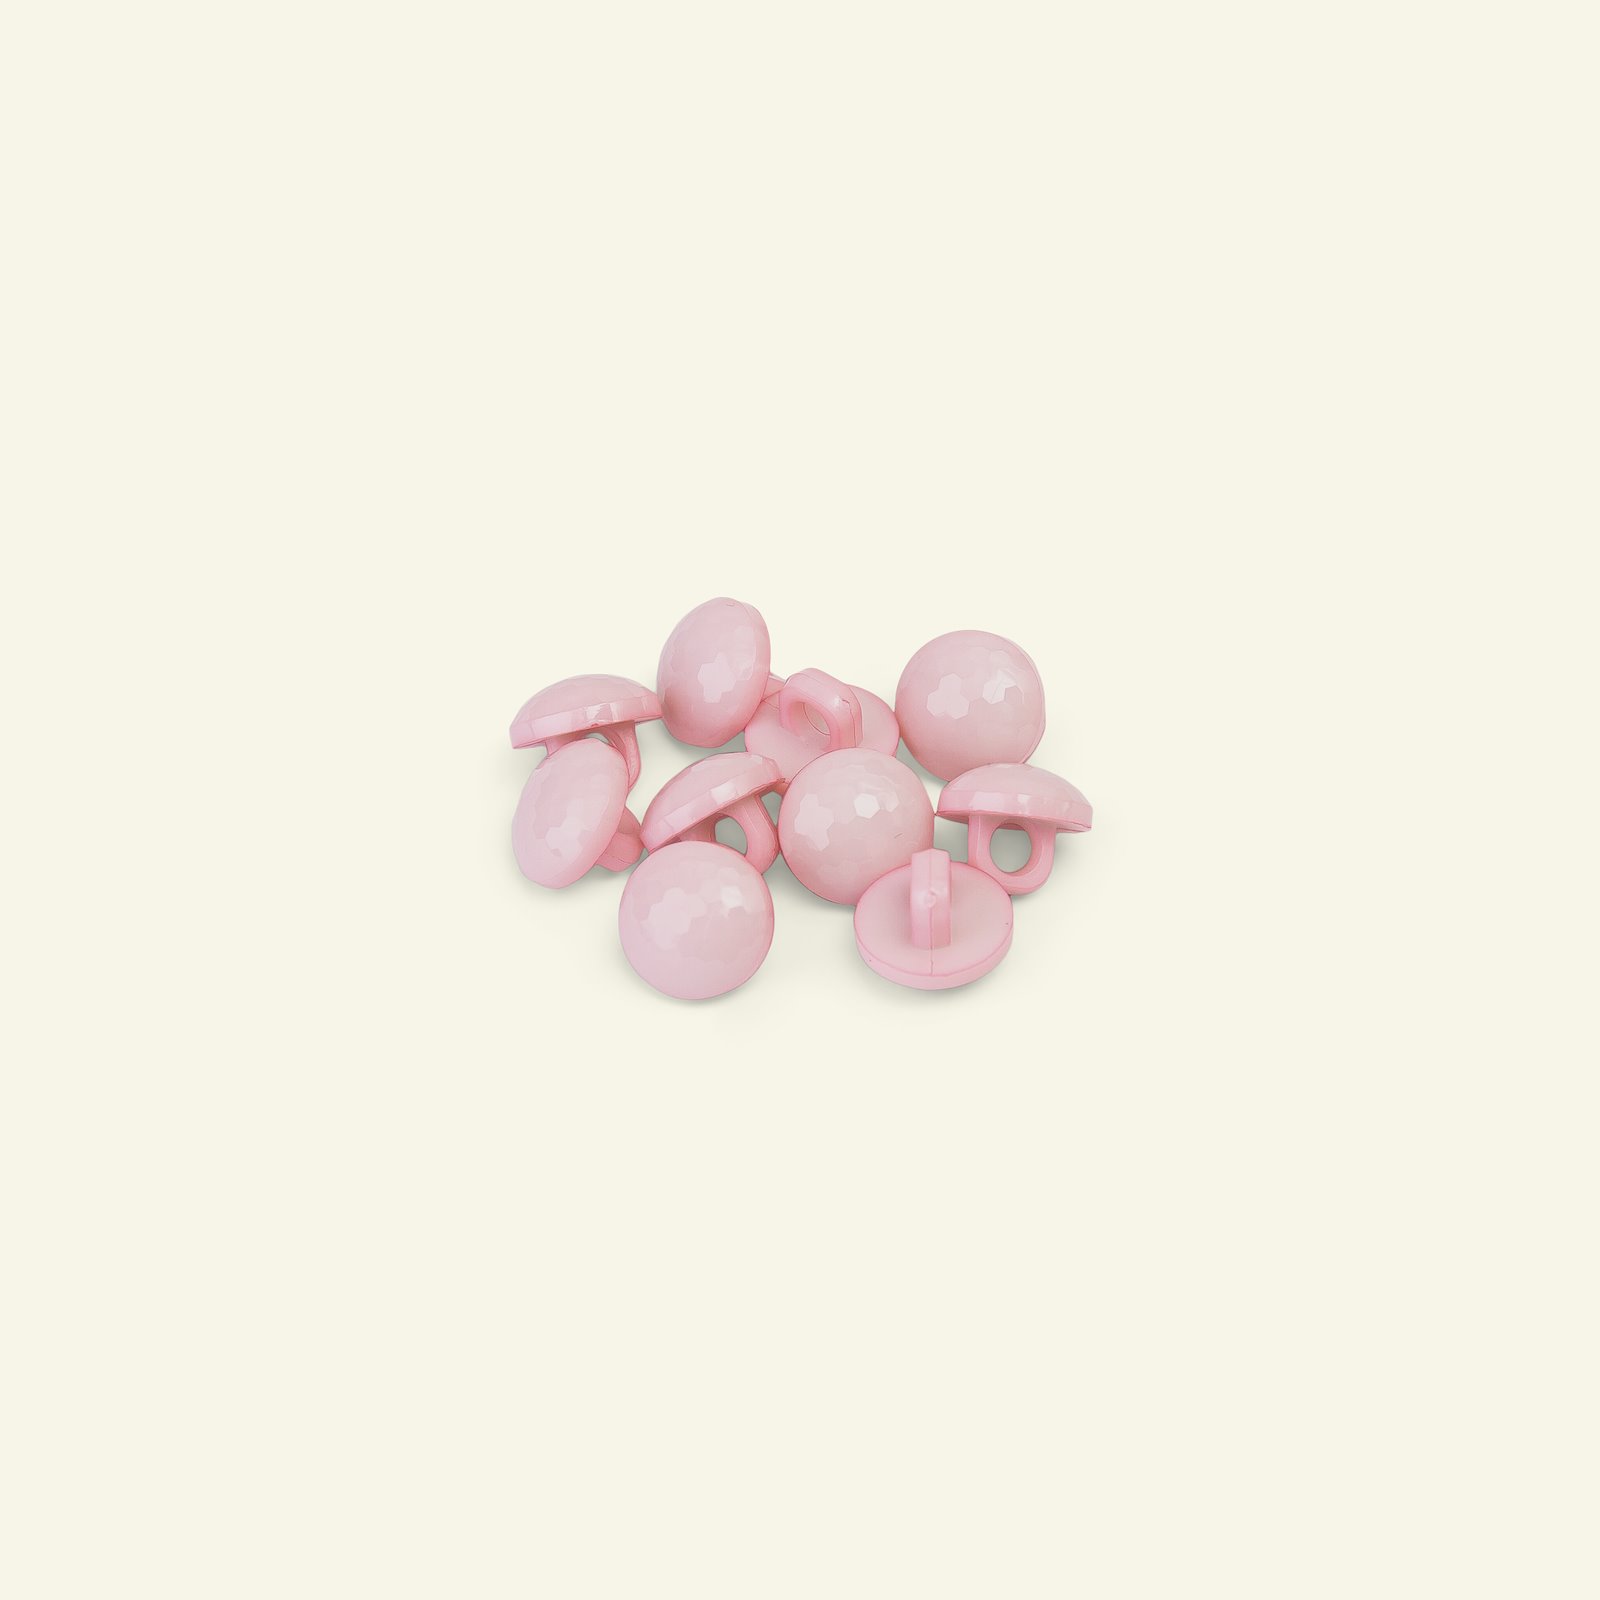 Shank button faceted 11mm pink 10pcs 33363_pack